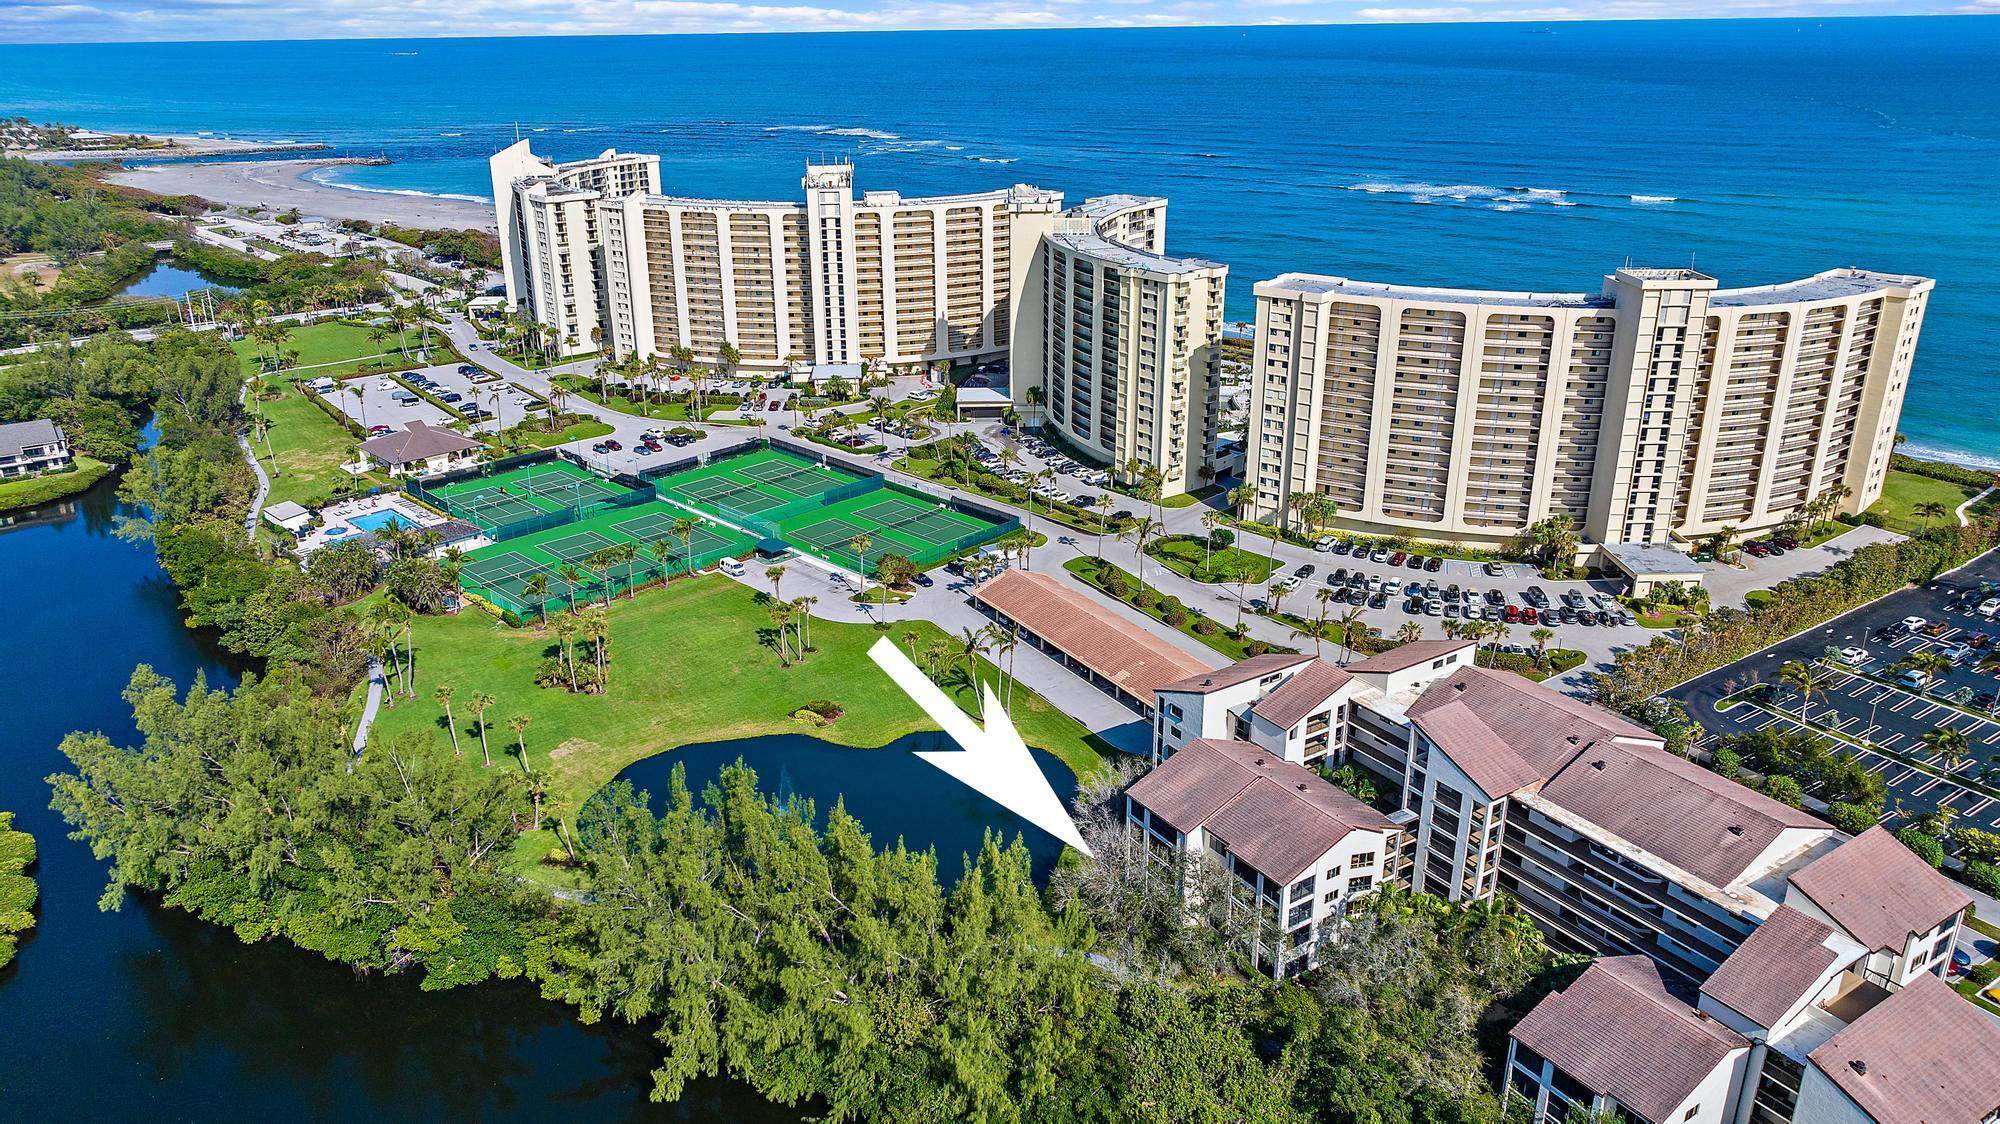 OWNER WILL PAY 2024 HOA DUES!Large 2/2 condo with private beach access just 300 steps from the building.  Location is great.  Walk to Publix, Cinopolis, Harborside, Guannabannas, Utiki and Square Grouper. 24 hour security at gate.First floor with pond view overlooking the estuary. Bathroom and kitchen remodeled.Friendly garden building with only 52 units.Tennis courts with pro available.  Men and womans sauna in the building. One of the few places you do not need to cross a busy street to get to the beach! Located behind Jupiter Beach Resort. Enjoy fine dining, spa and tiki bar there all year round.